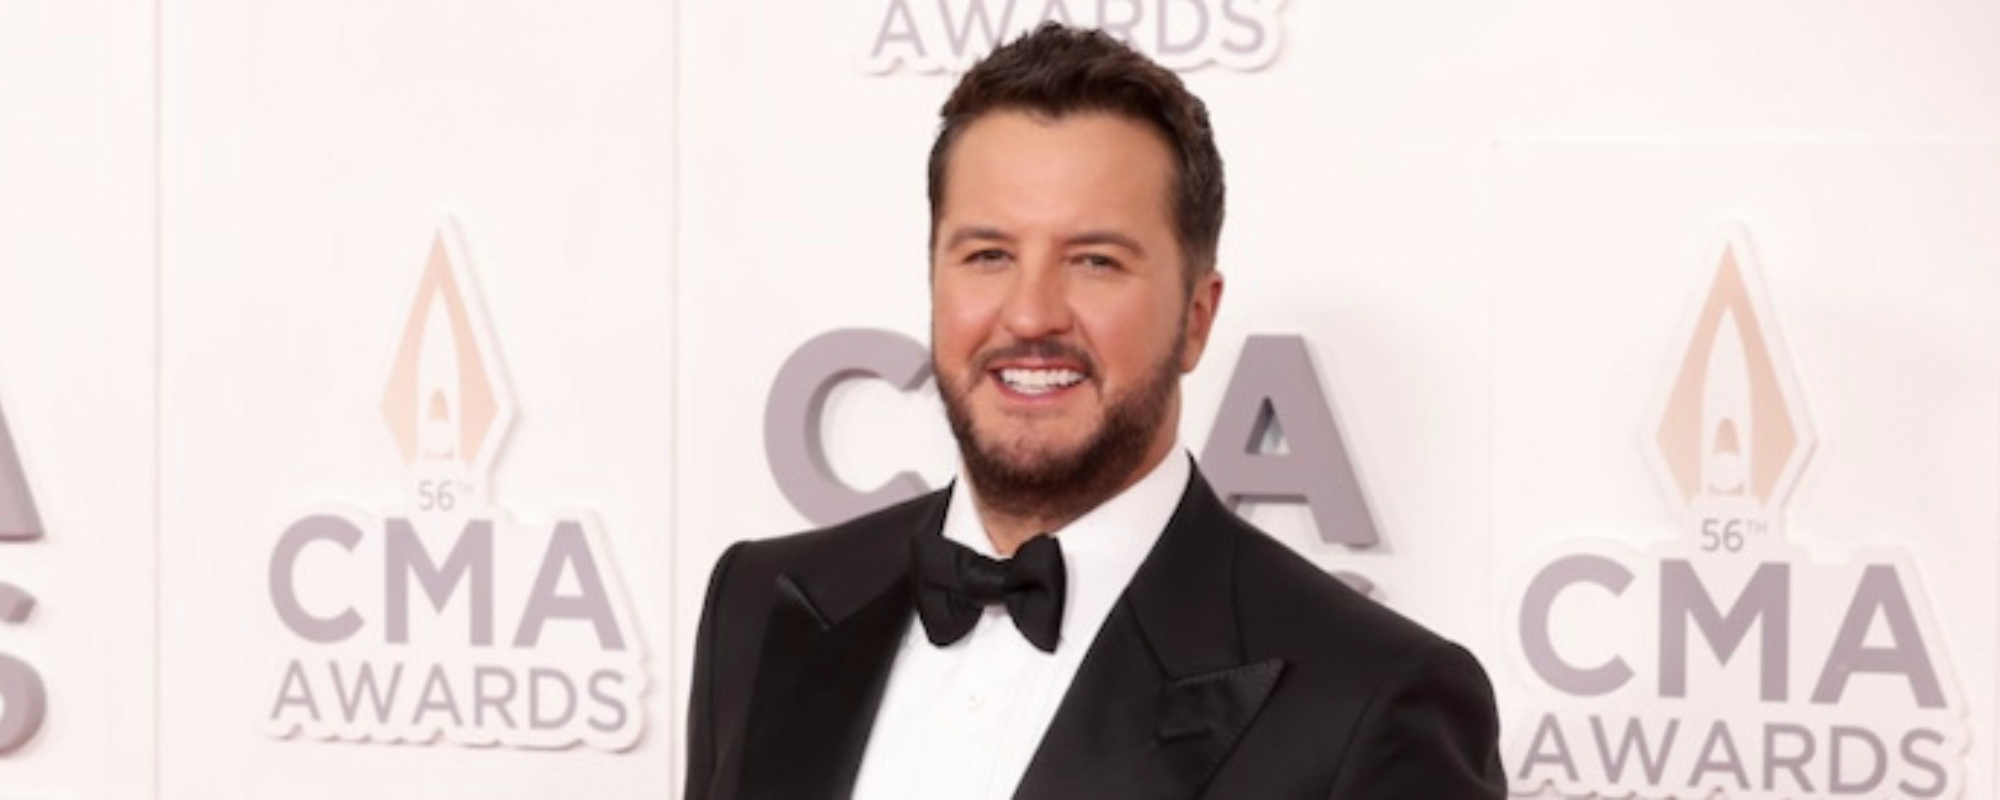 Luke Bryan Reflects on His History with the CMA Awards Ahead of Hosting the Event for the Third Consecutive Year